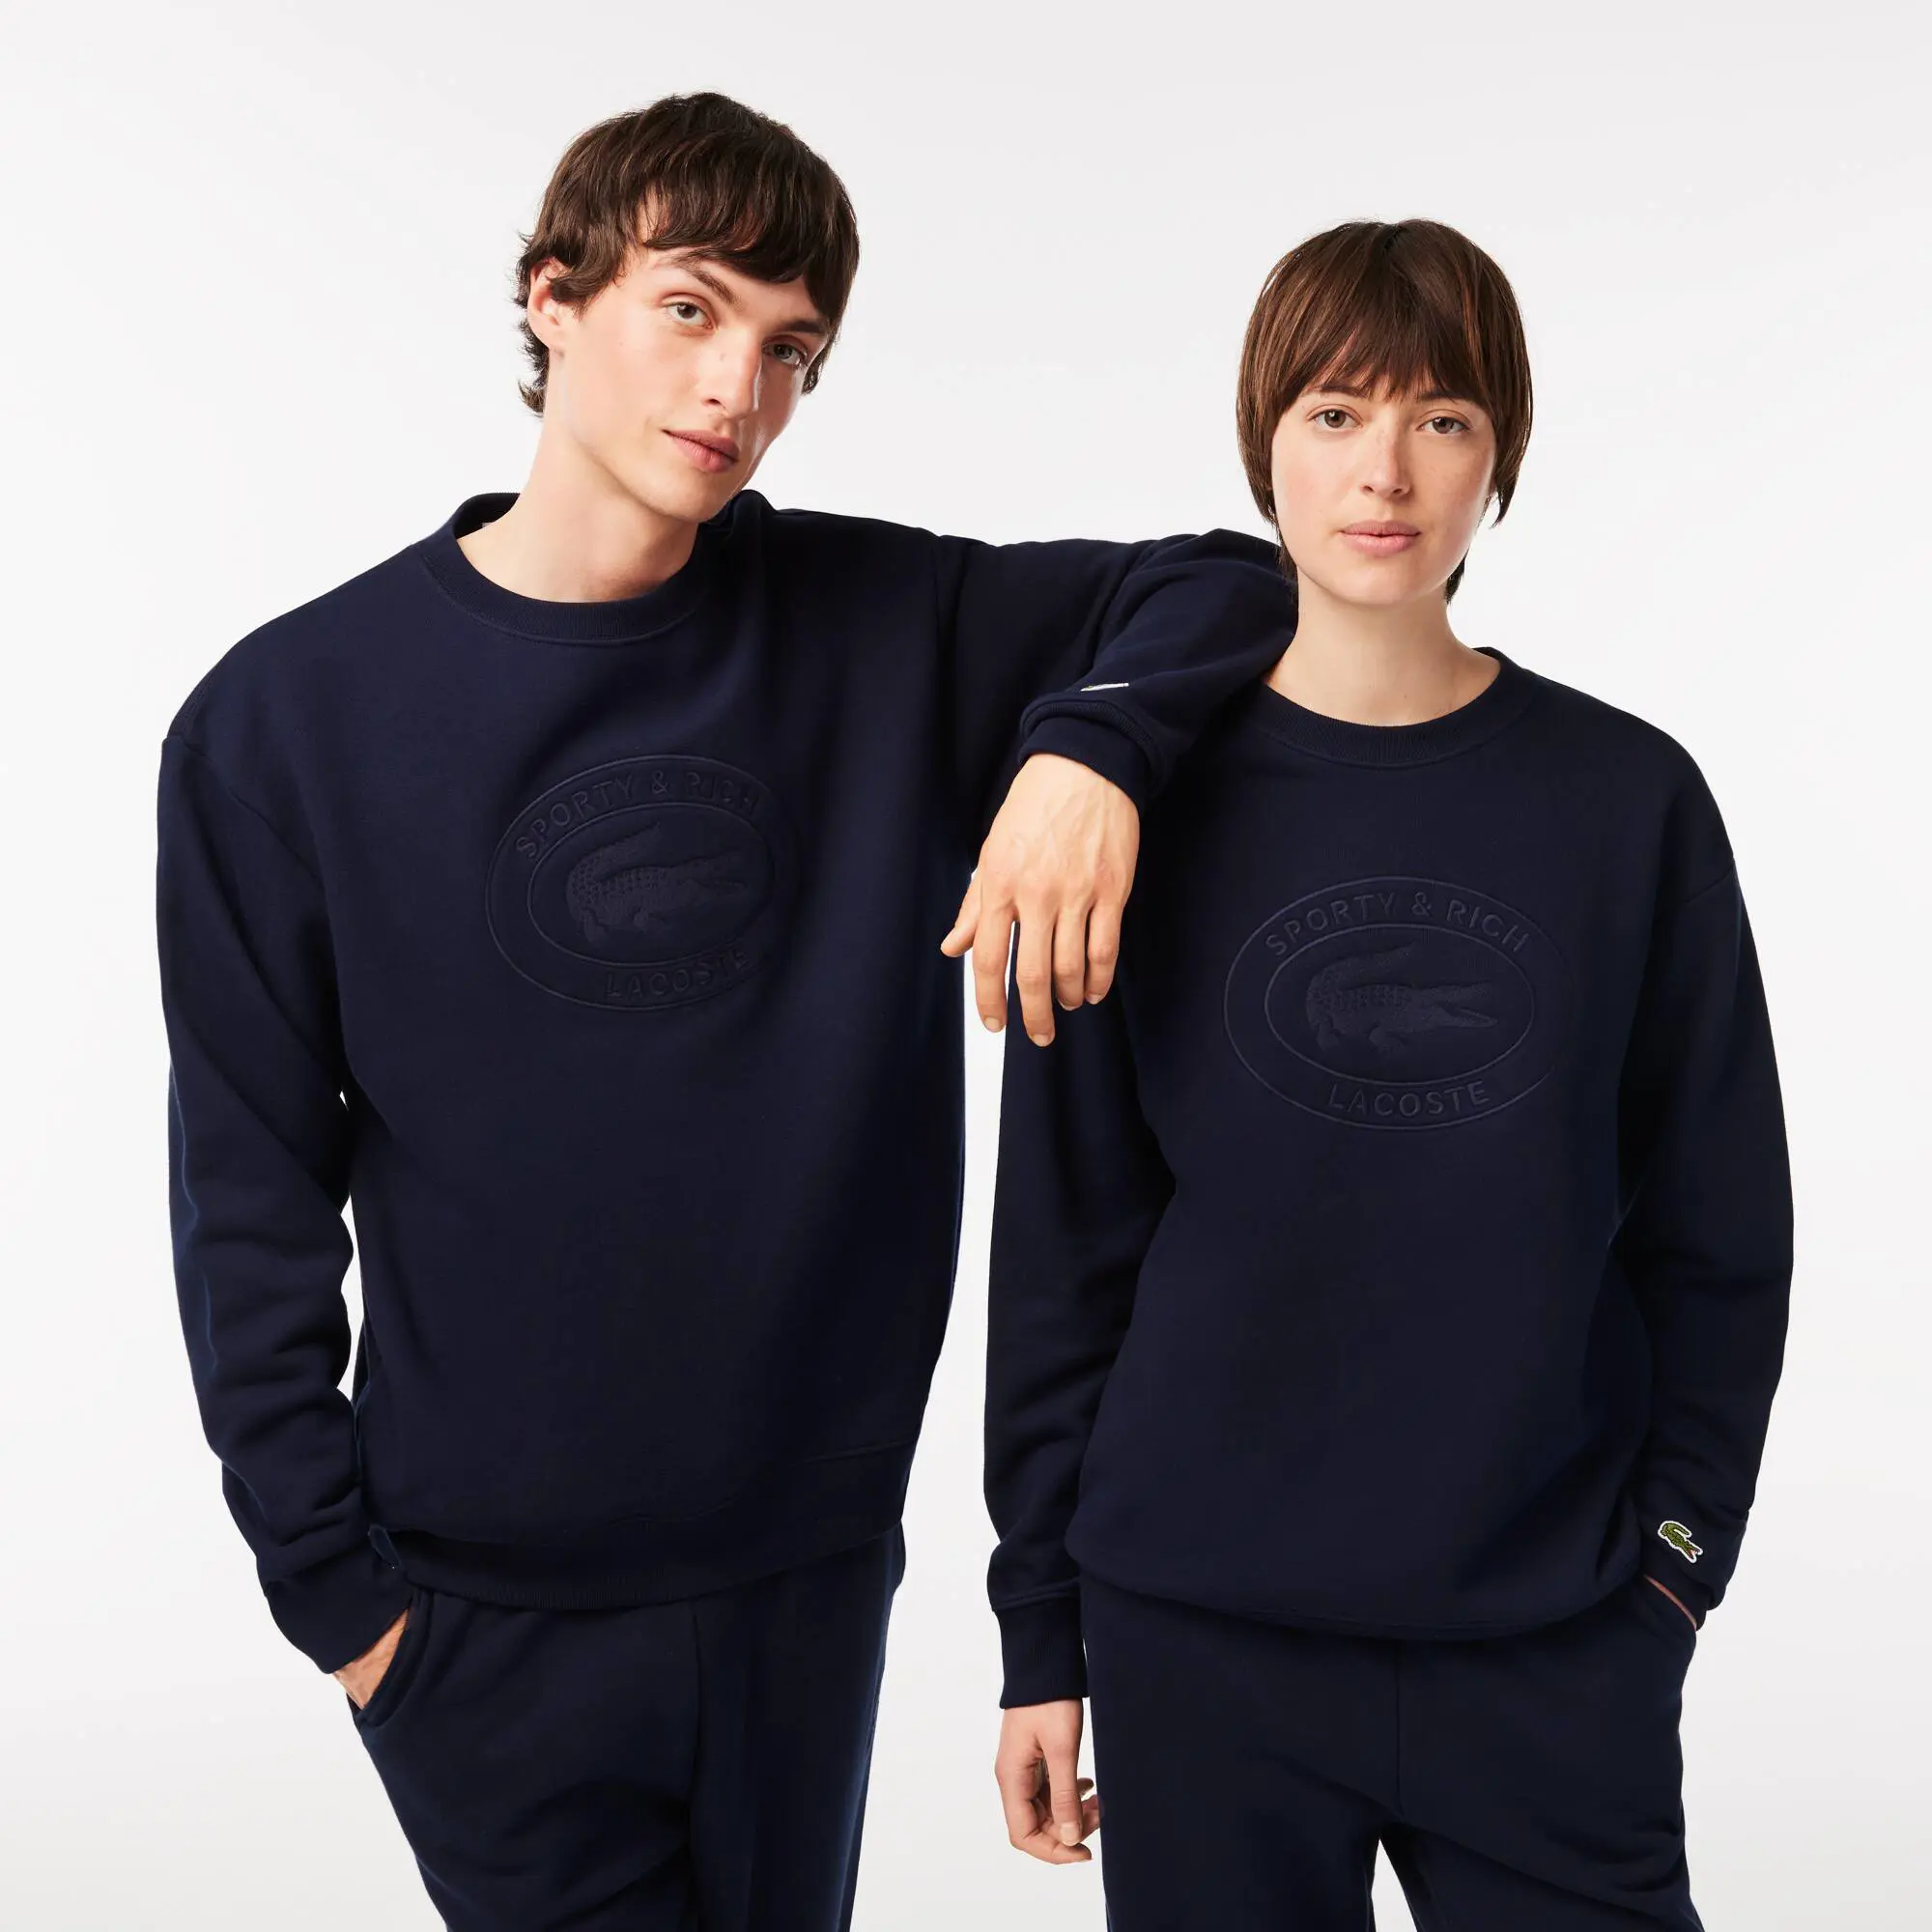 Lacoste x Sporty & Rich Embroidered Sweatshirt. 1